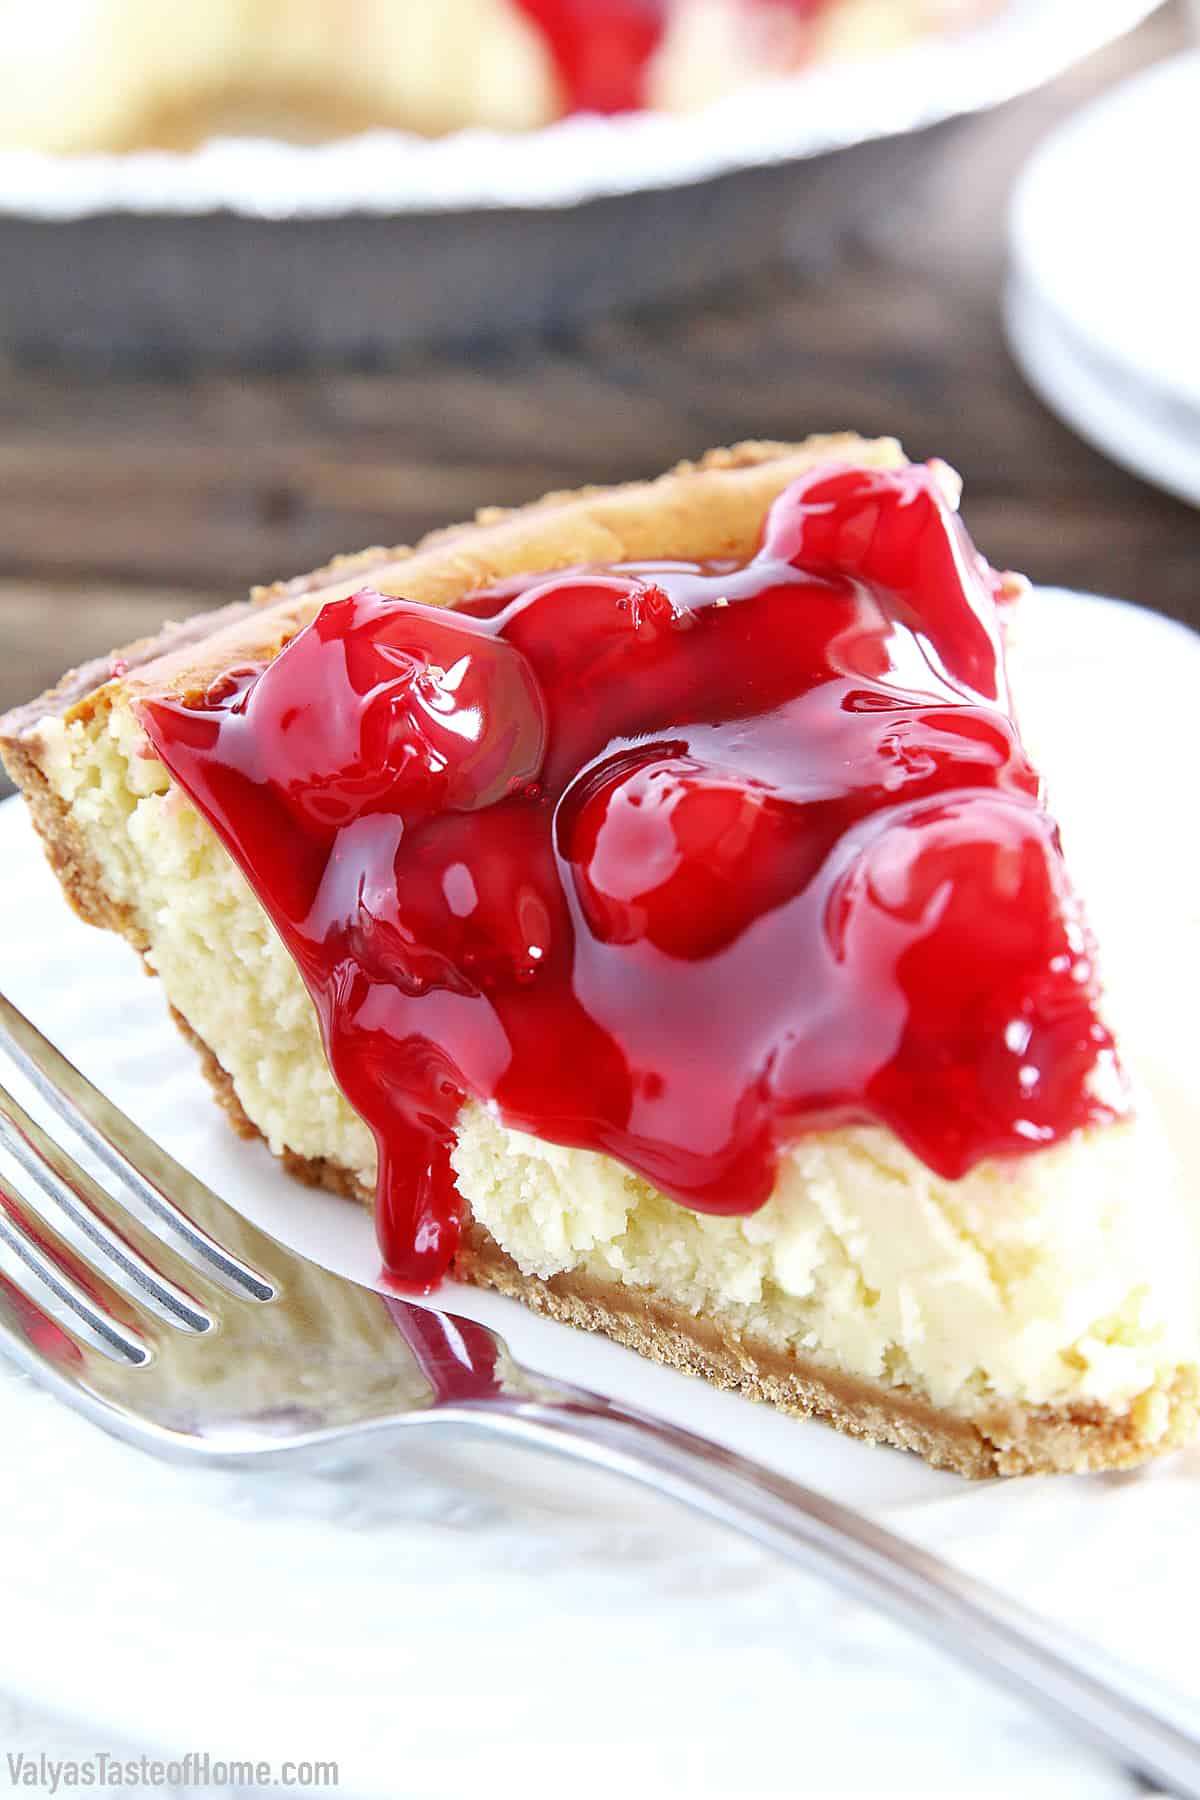 This Cherry Cheesecake is so easy to make and has a delicious original flavor that is hard to beat. It’s very smooth and creamy. A bit on the sweet side, but the slightly sour cherry topping perfectly complements that sweetness that is irresistible.